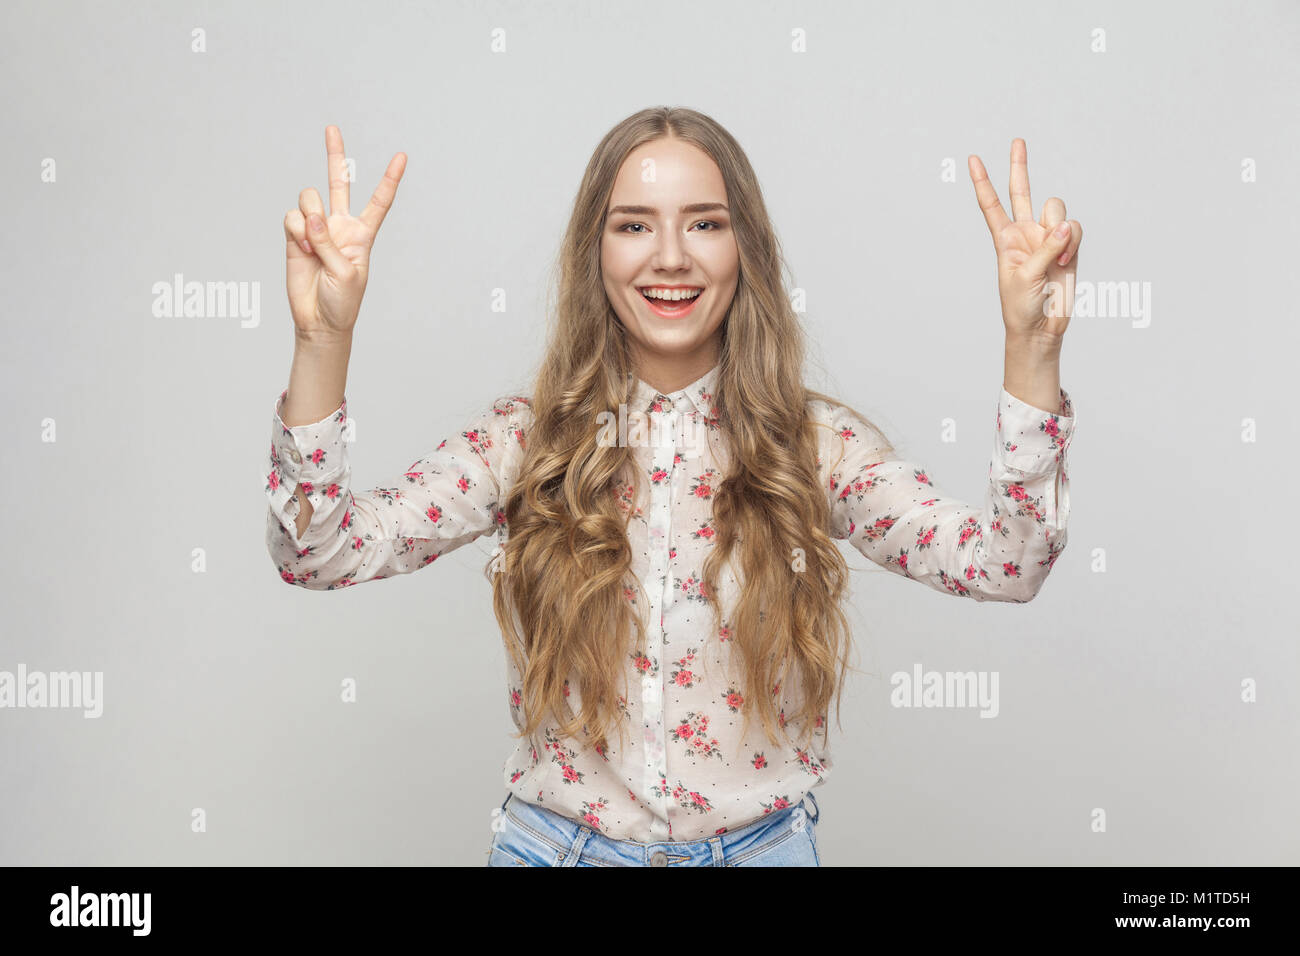 Young adult woman showing peace sign and toothy smiling. Studio shot Stock Photo